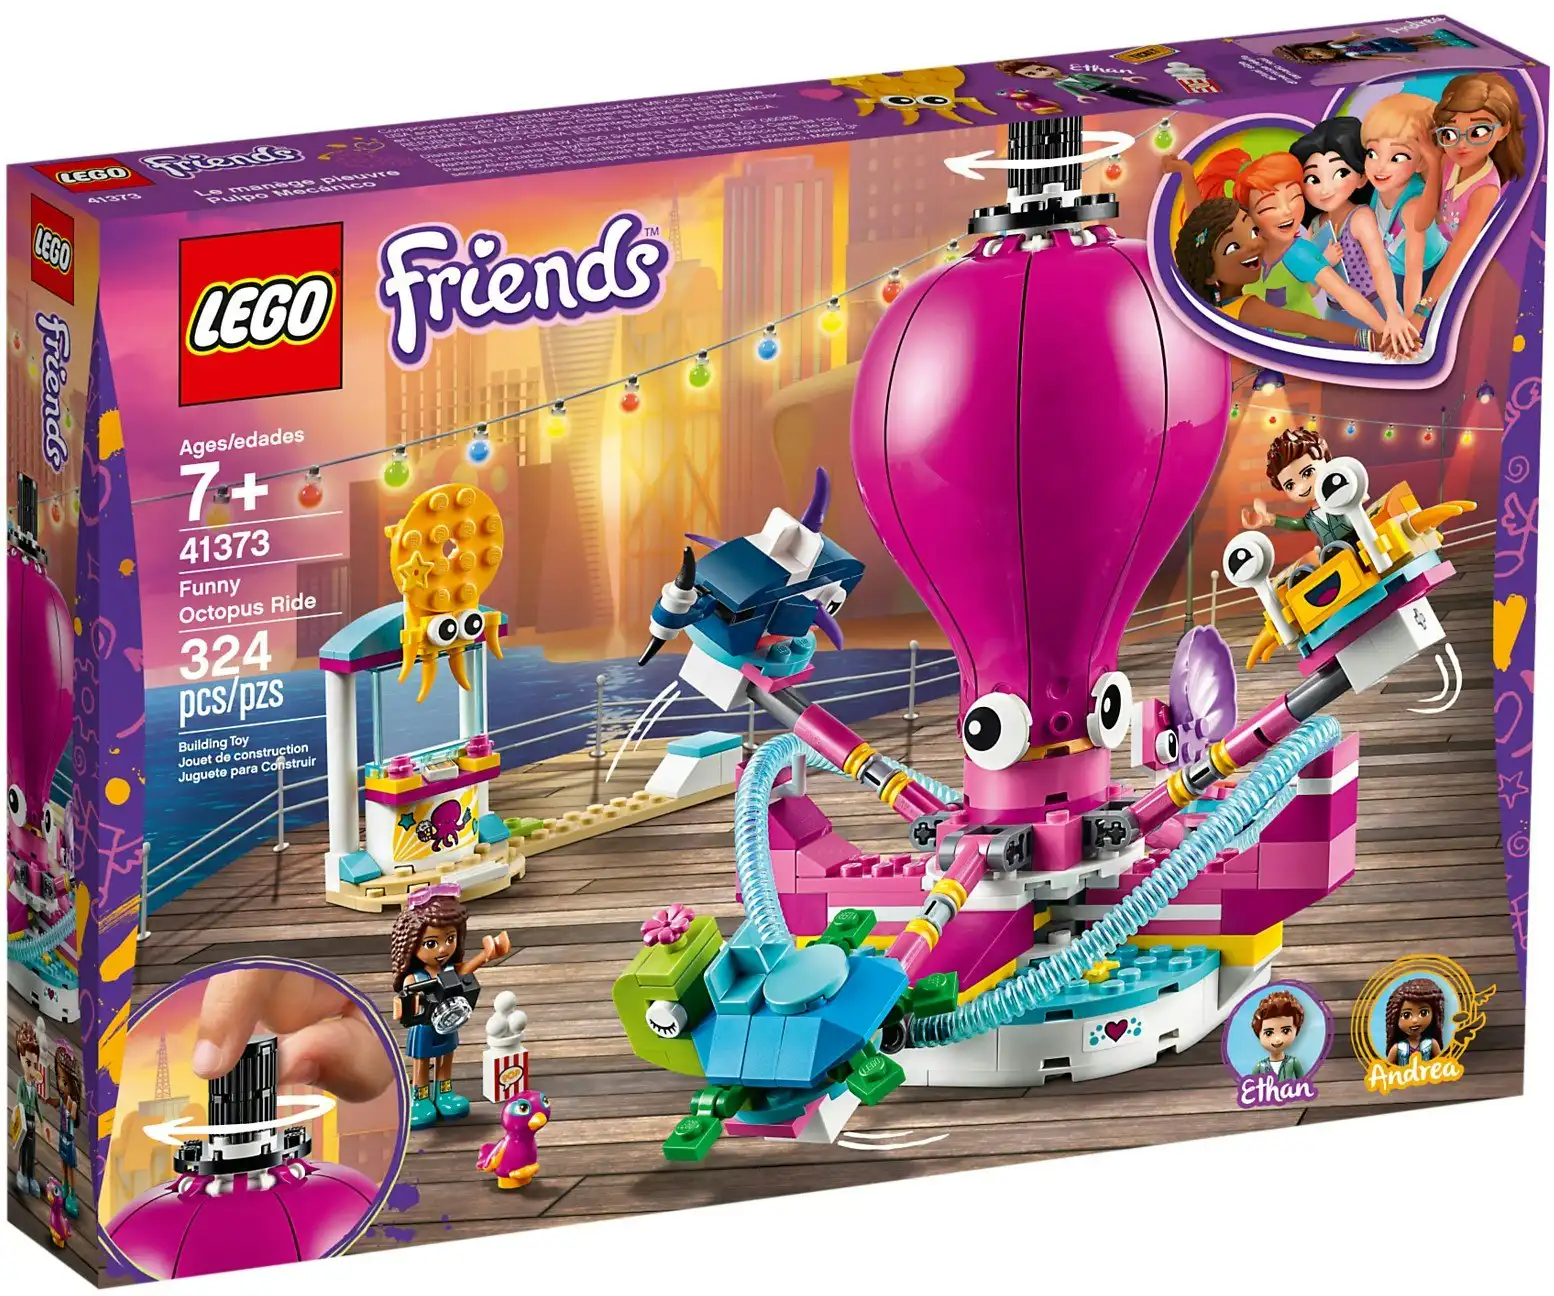 LEGO 41373 Funny Octopus Ride - Friends